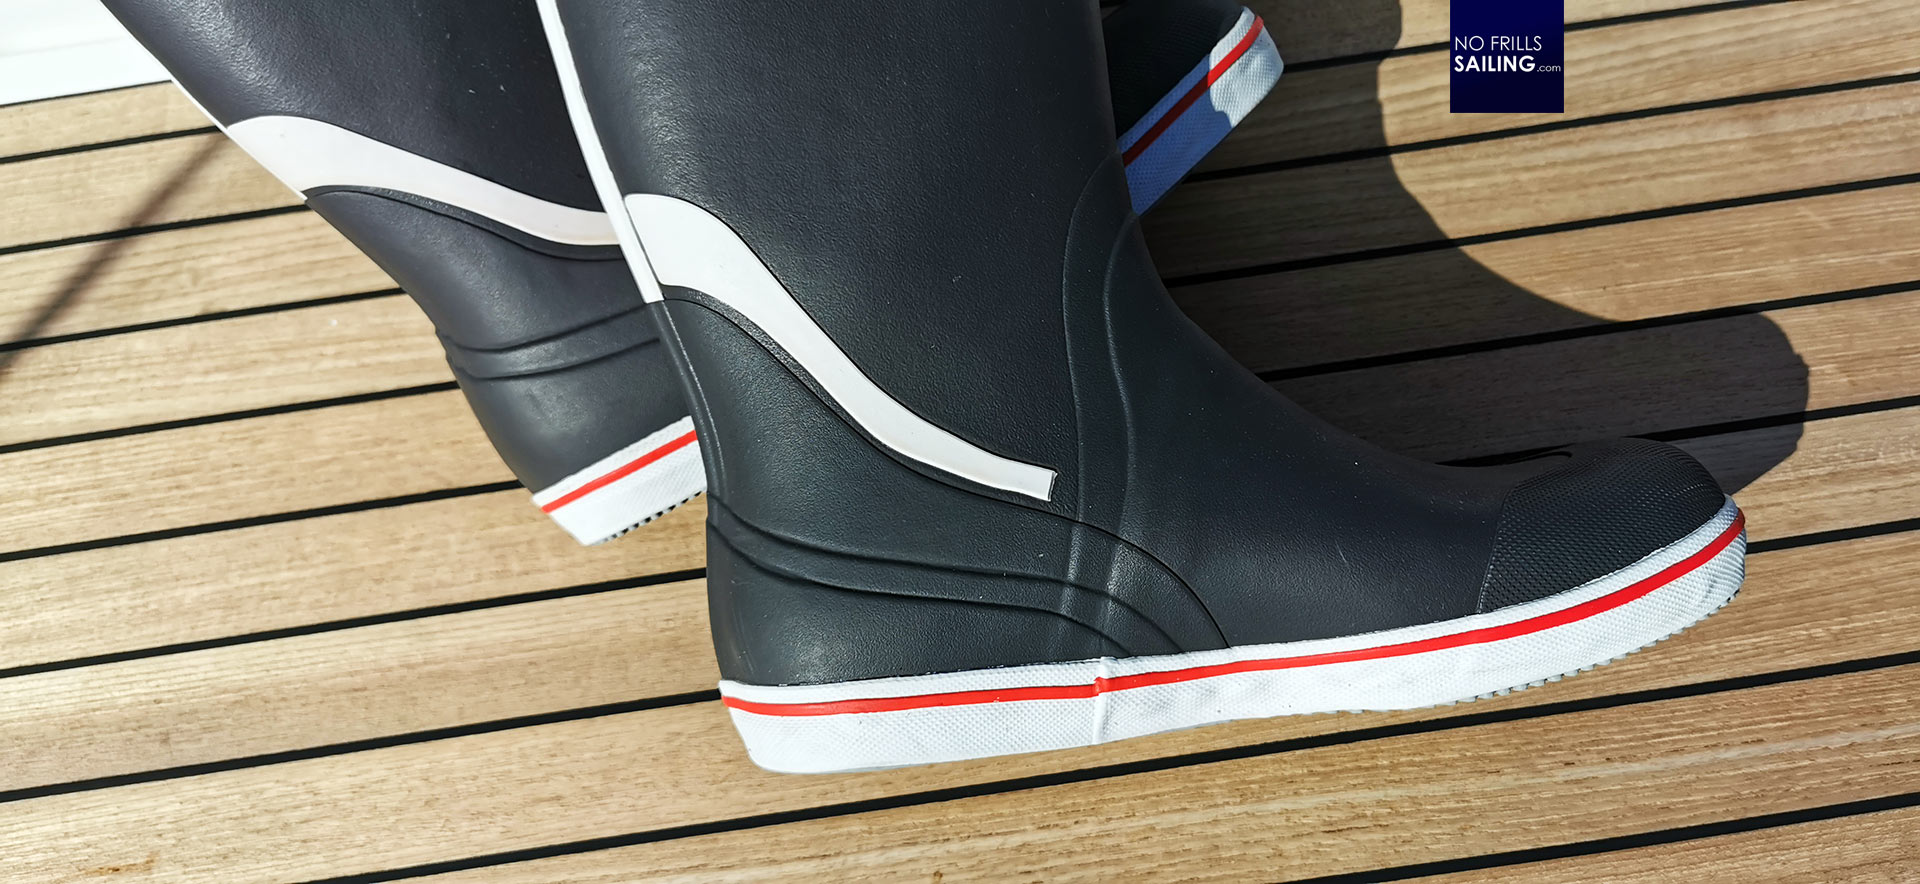 Fix Your Sailing Booties With Shoe Goo – Get Wet Sailing